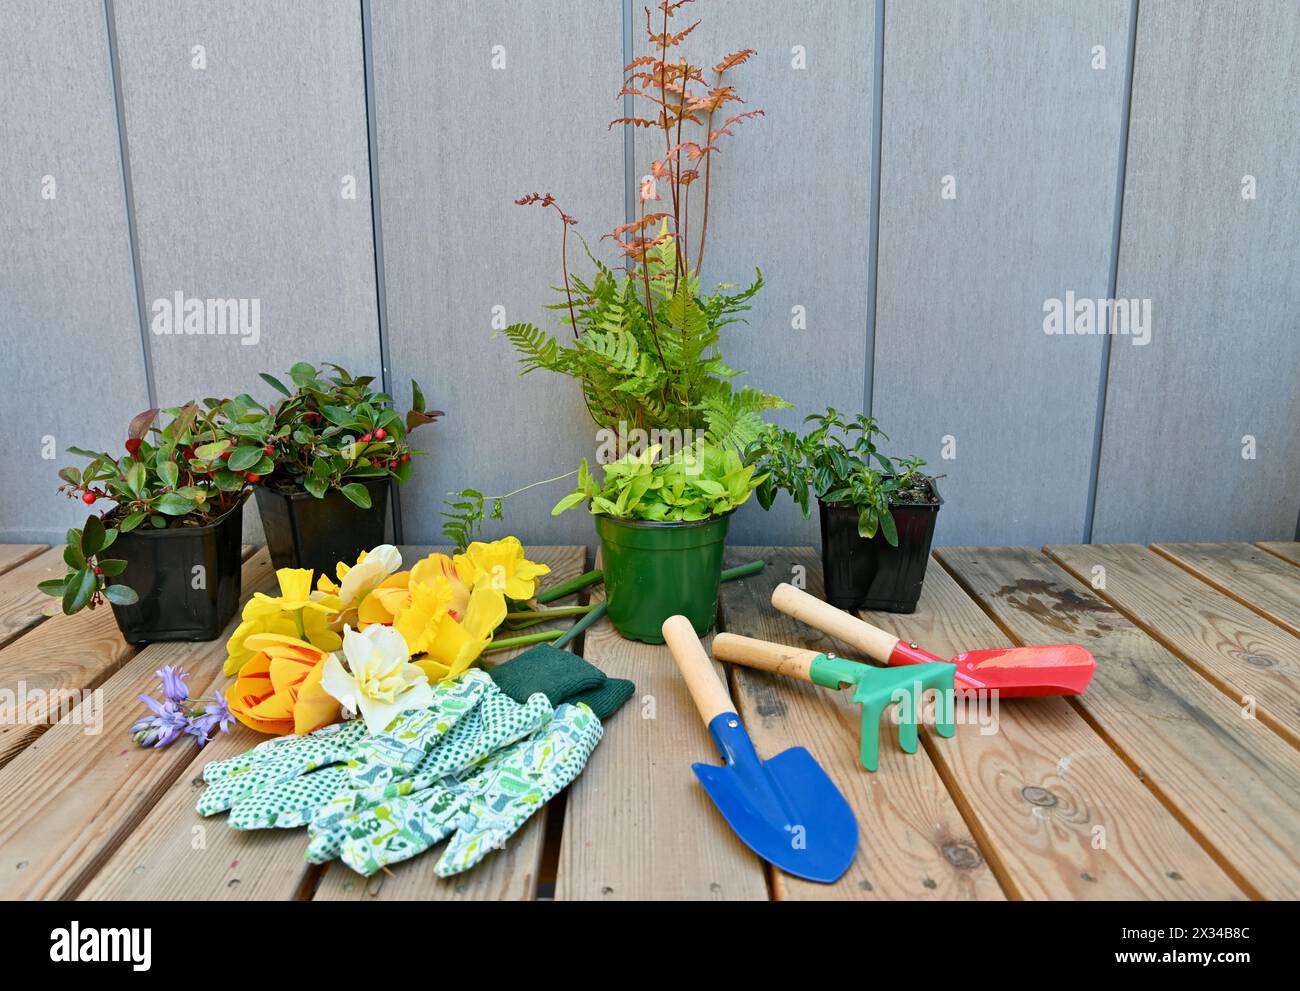 Spring garden potting bench with garden equipment tools for yard work clean up. Stock Photo